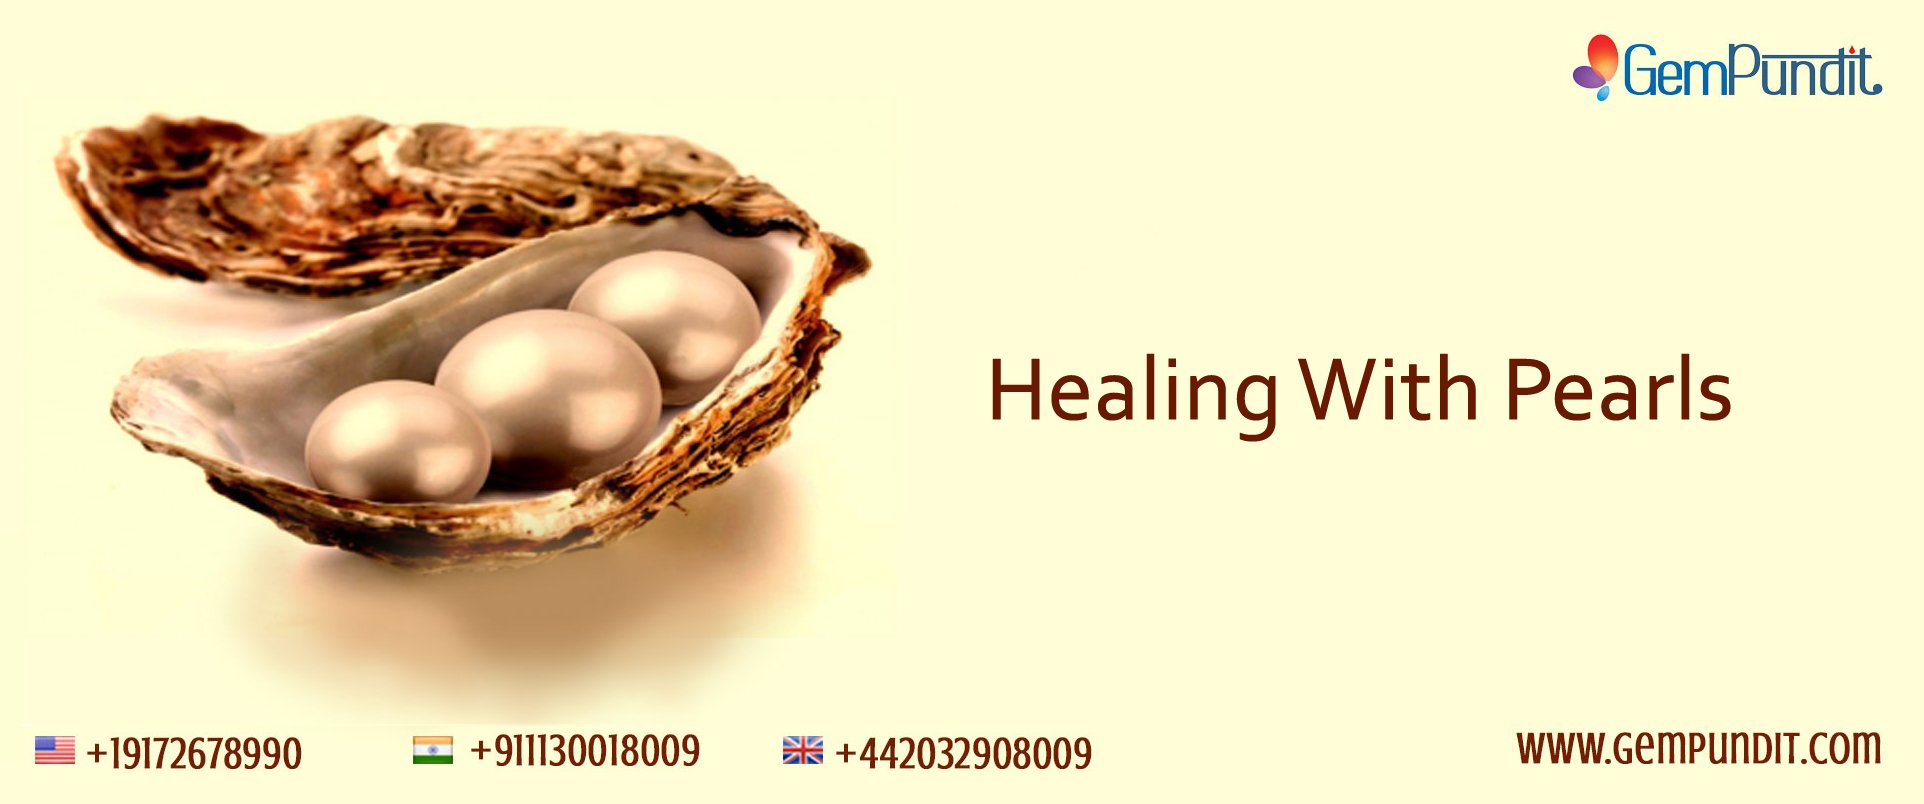 Healing With Pearls